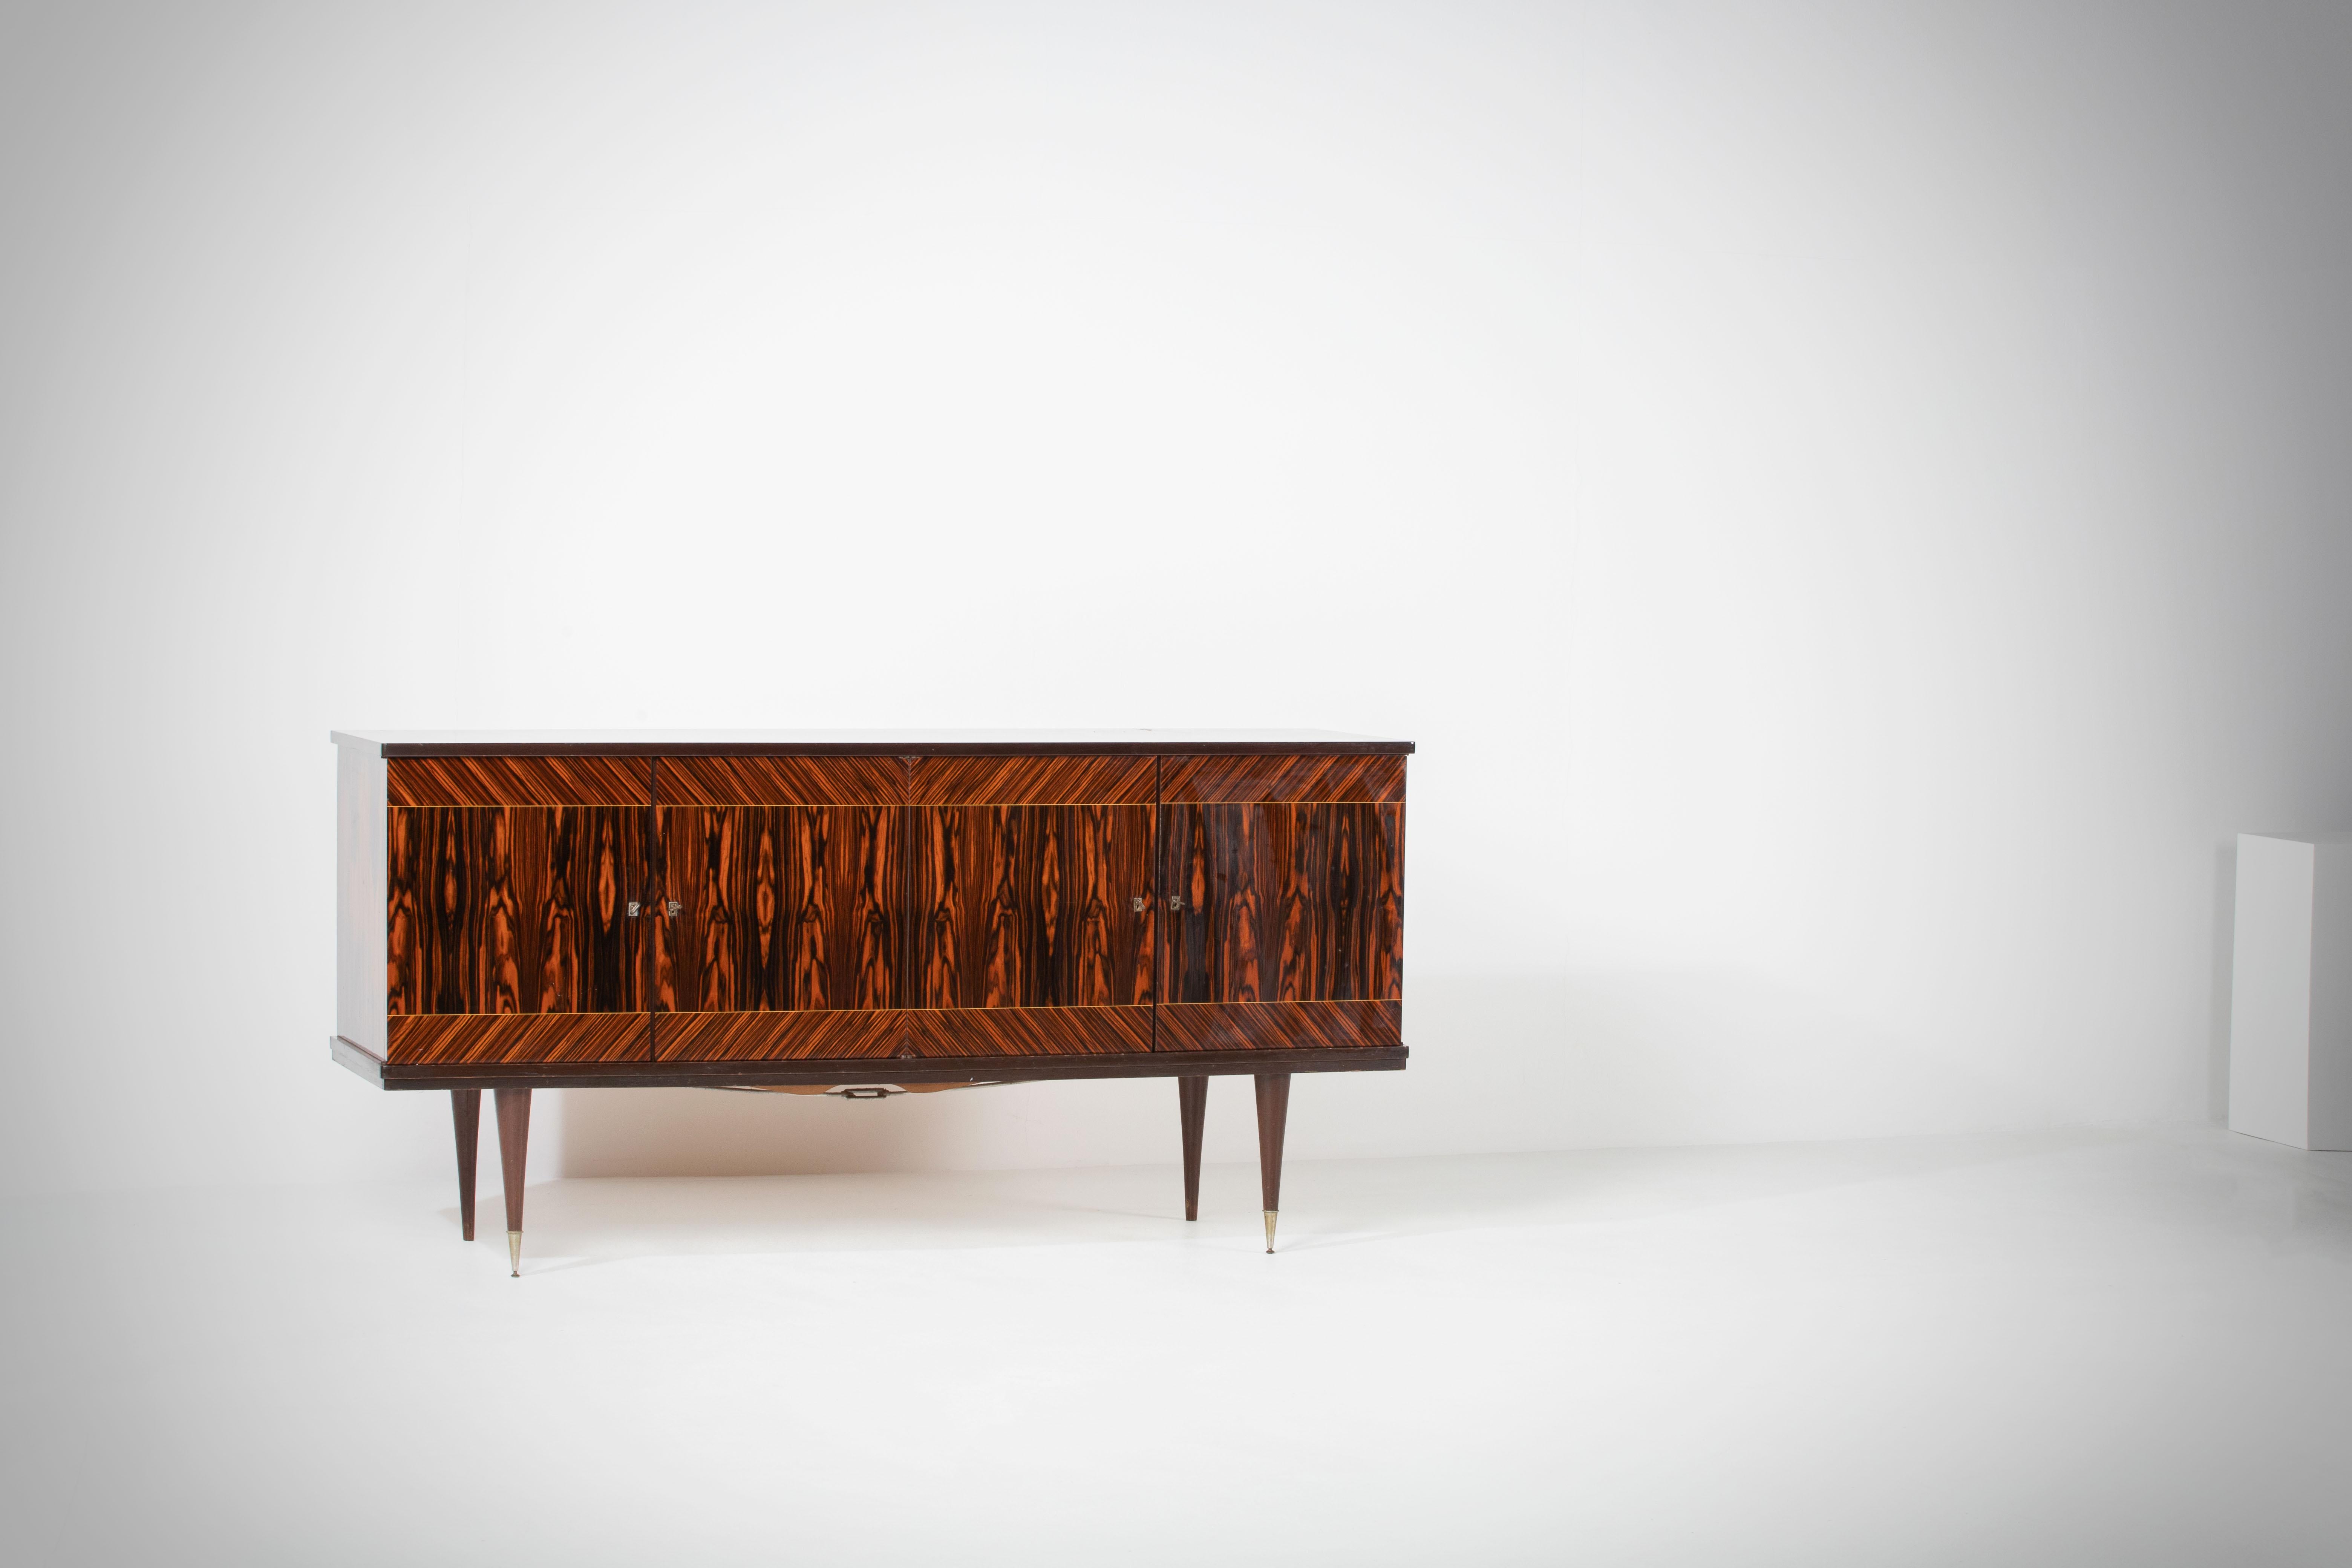 French Art Deco sideboard, credenza, with bar cabinet. 
The sideboard features stunning Macassar wood grain and rich pattern. It offers ample storage, with shelves.
The case rests on tall tapered legs with brass details. 
A unique blend of Art Deco